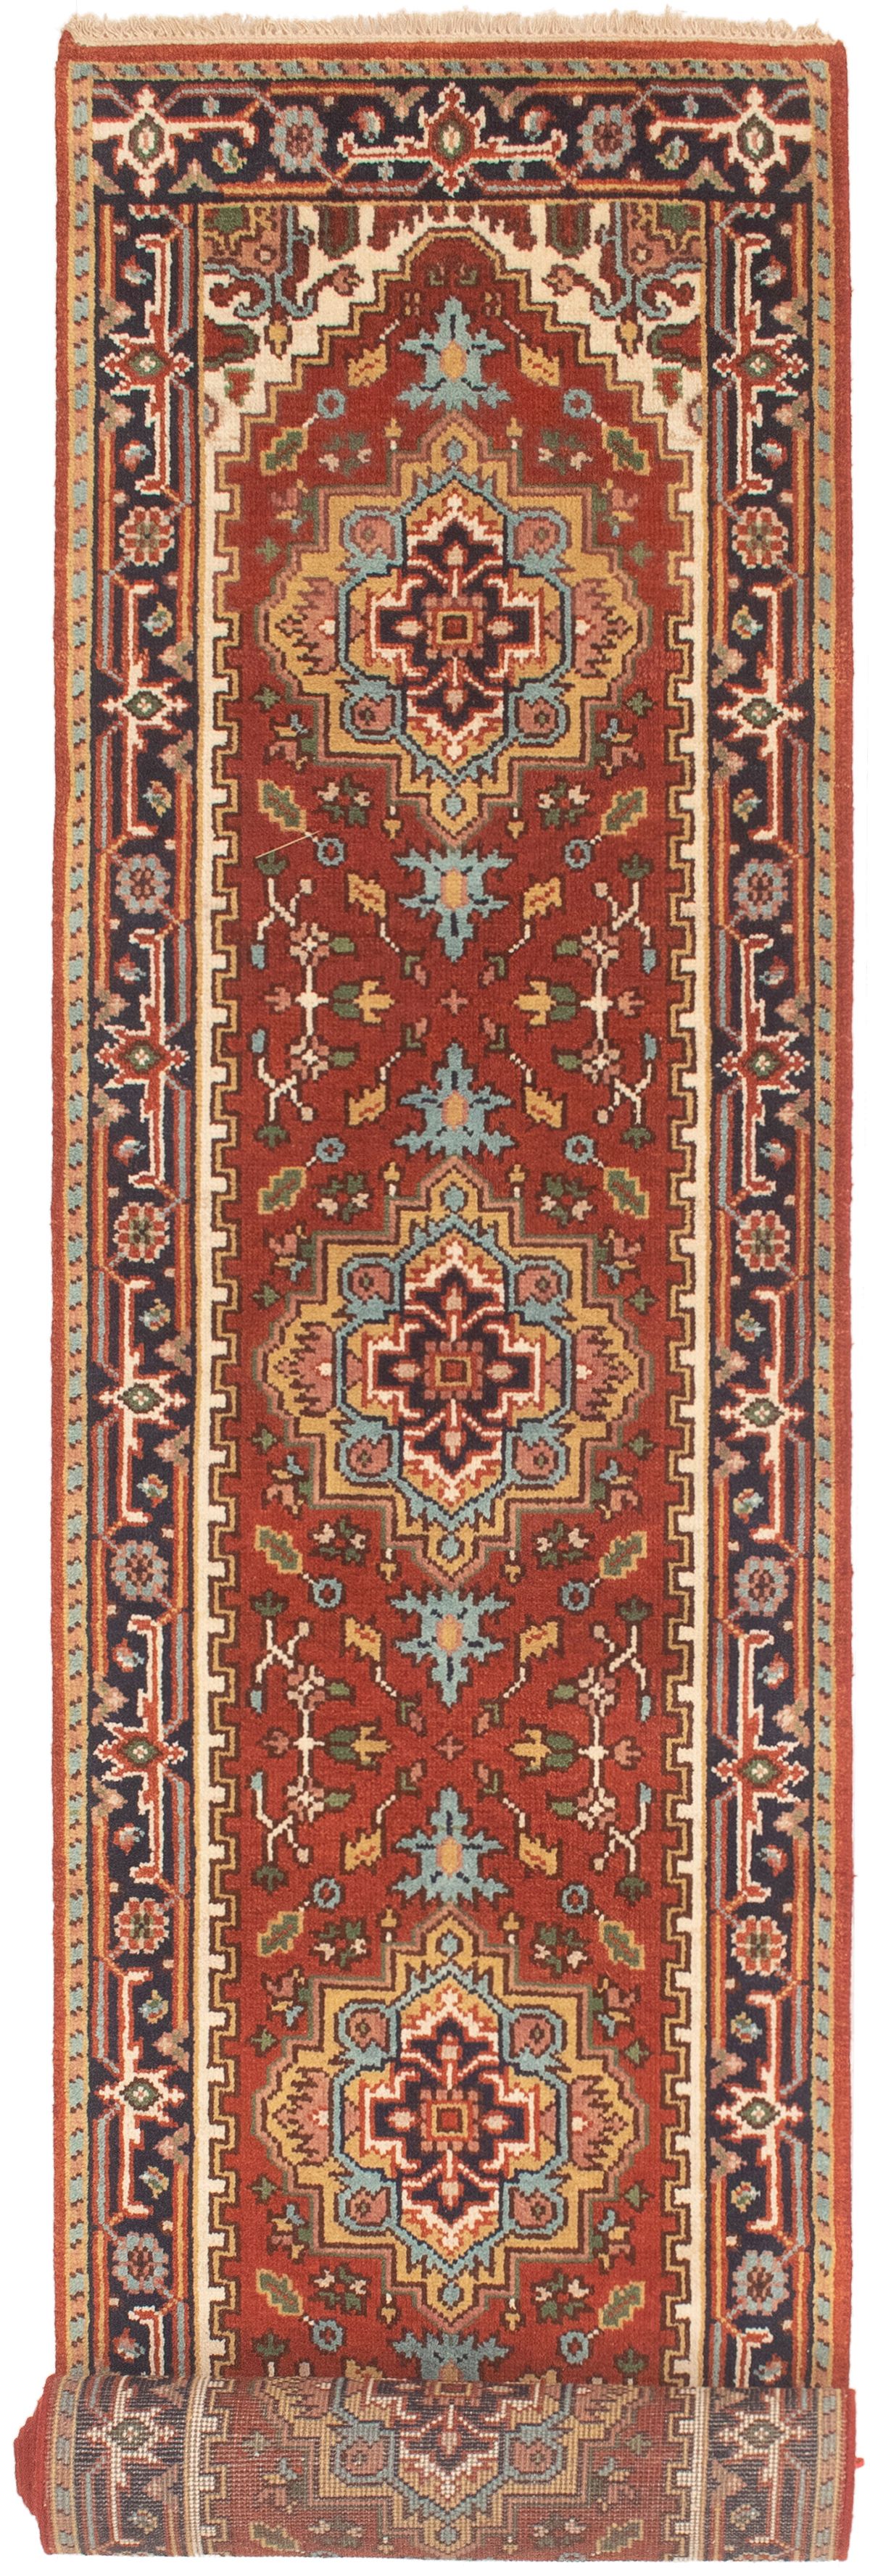 Hand-knotted Serapi Heritage Dark Copper Wool Rug 2'6" x 15'9"  Size: 2'6" x 15'9"  